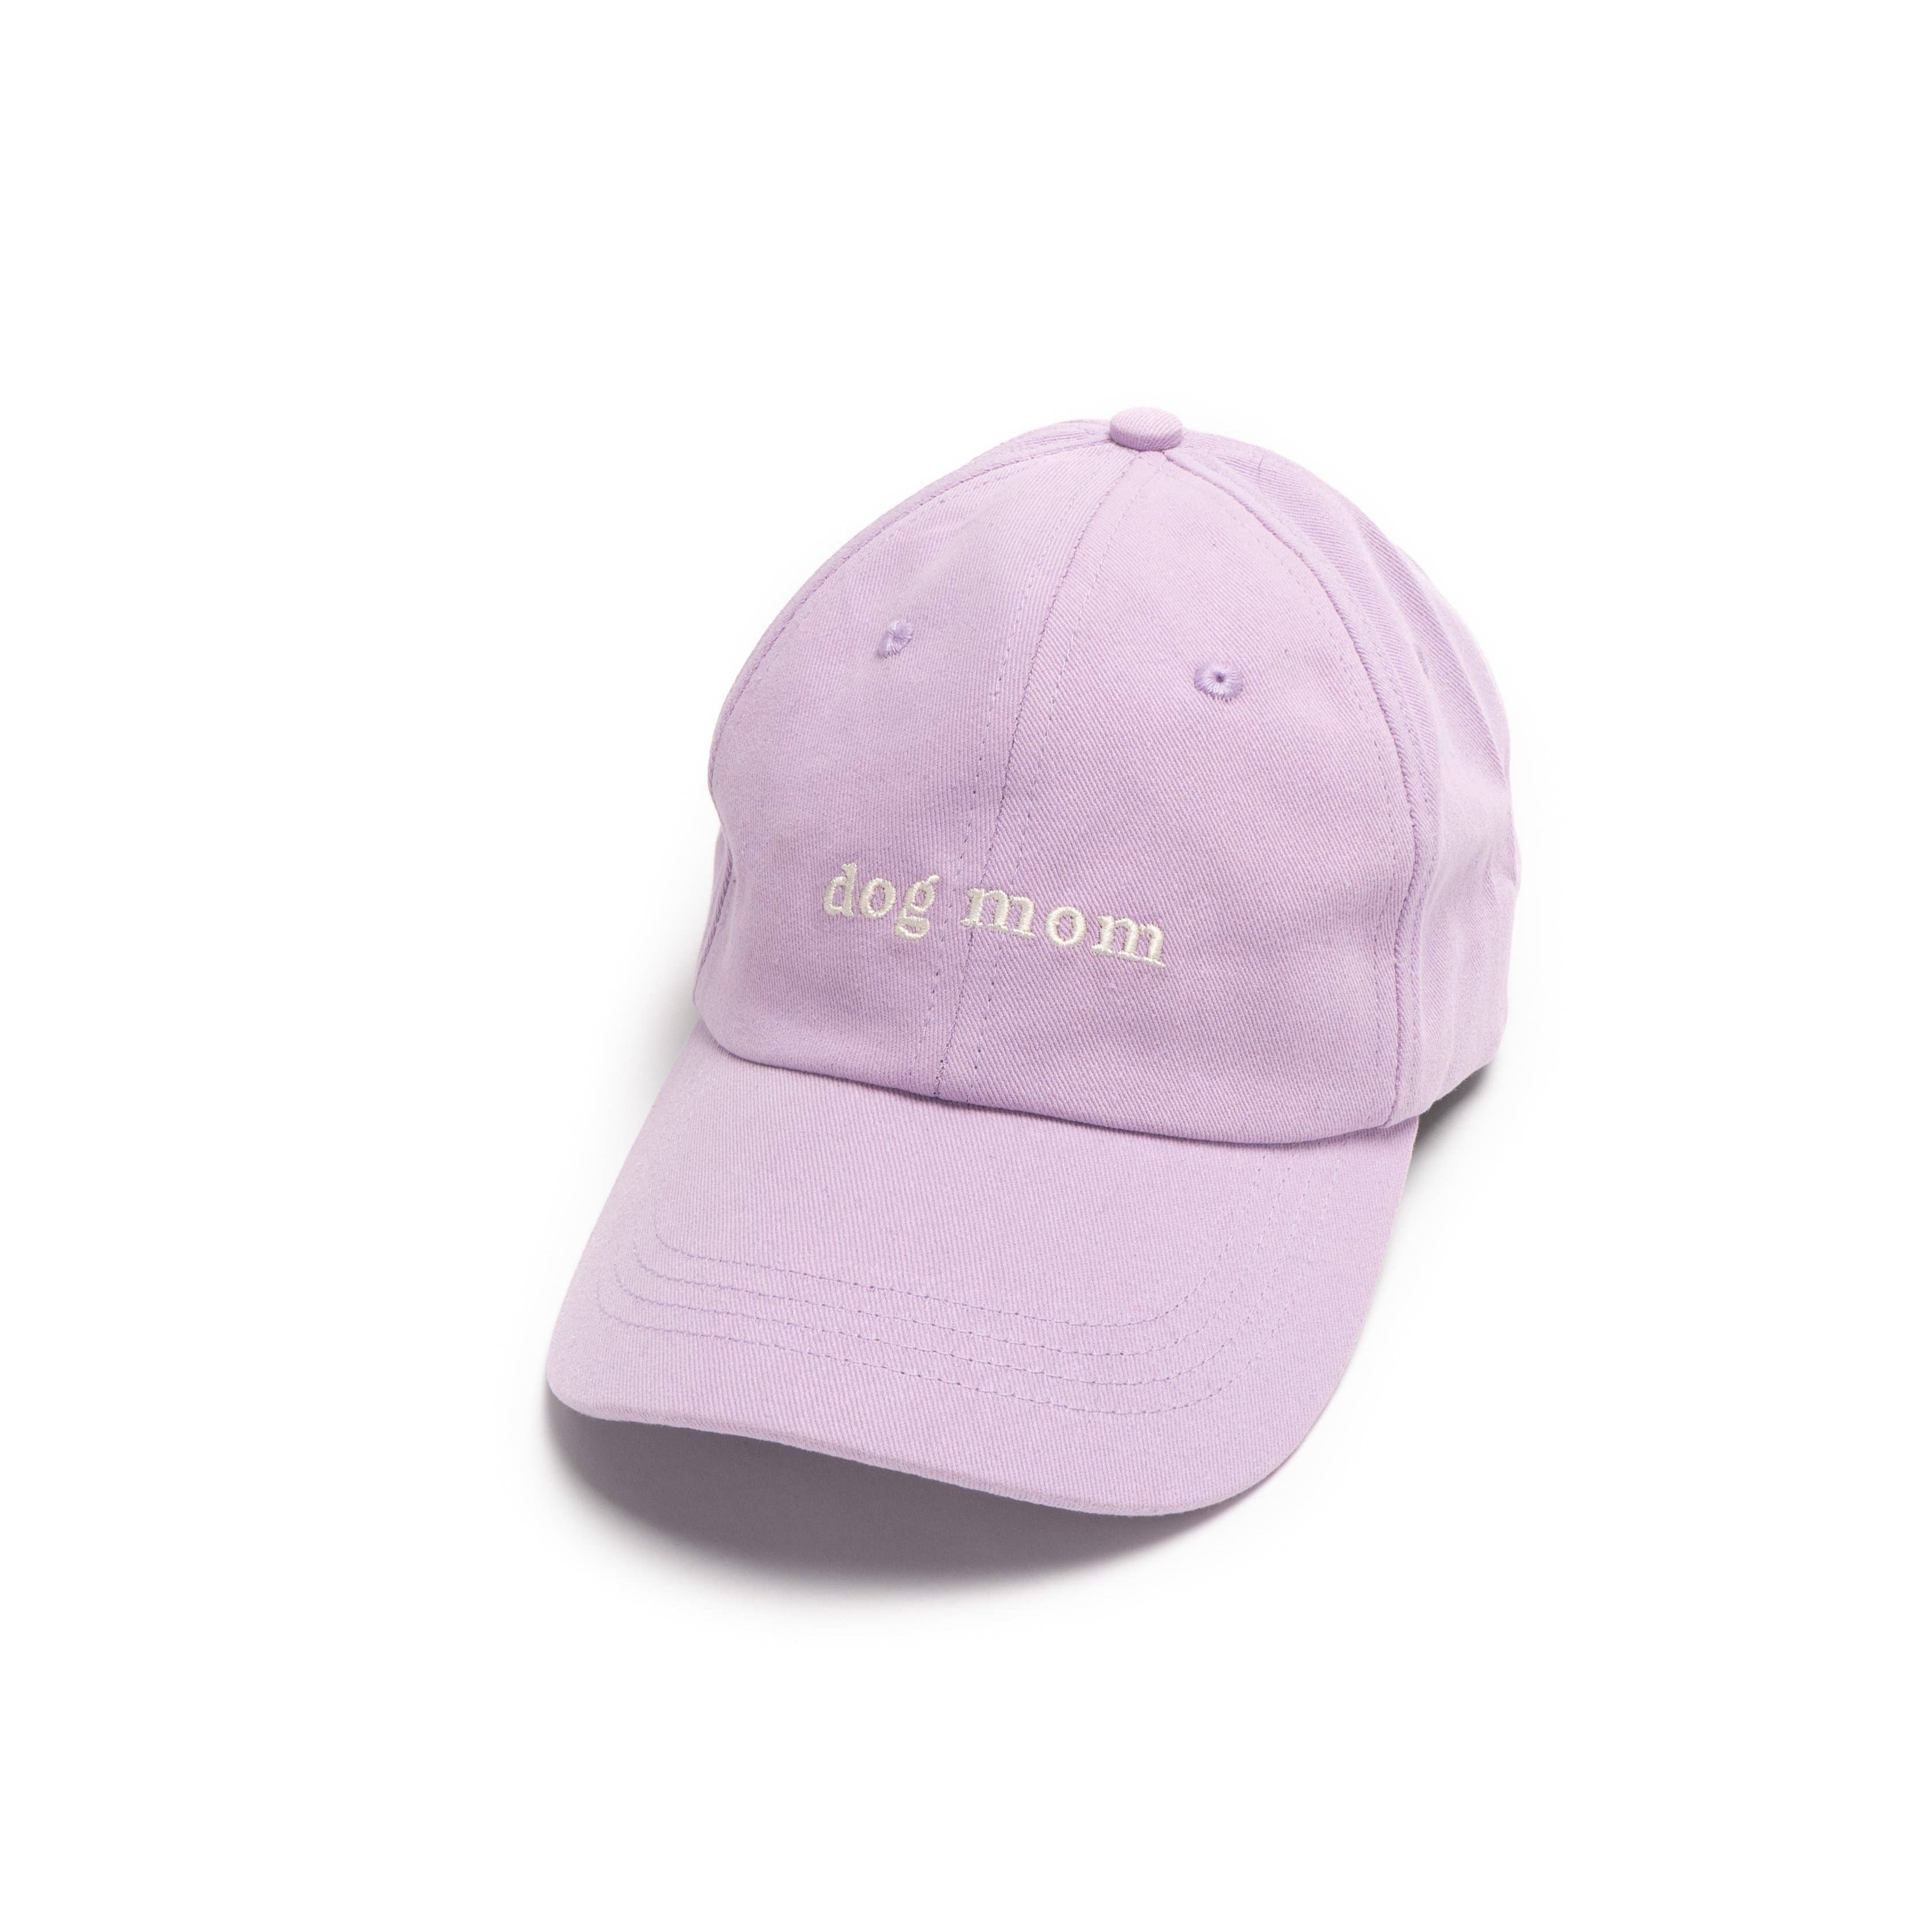 Lucy & Co. - Dog Mom Hat